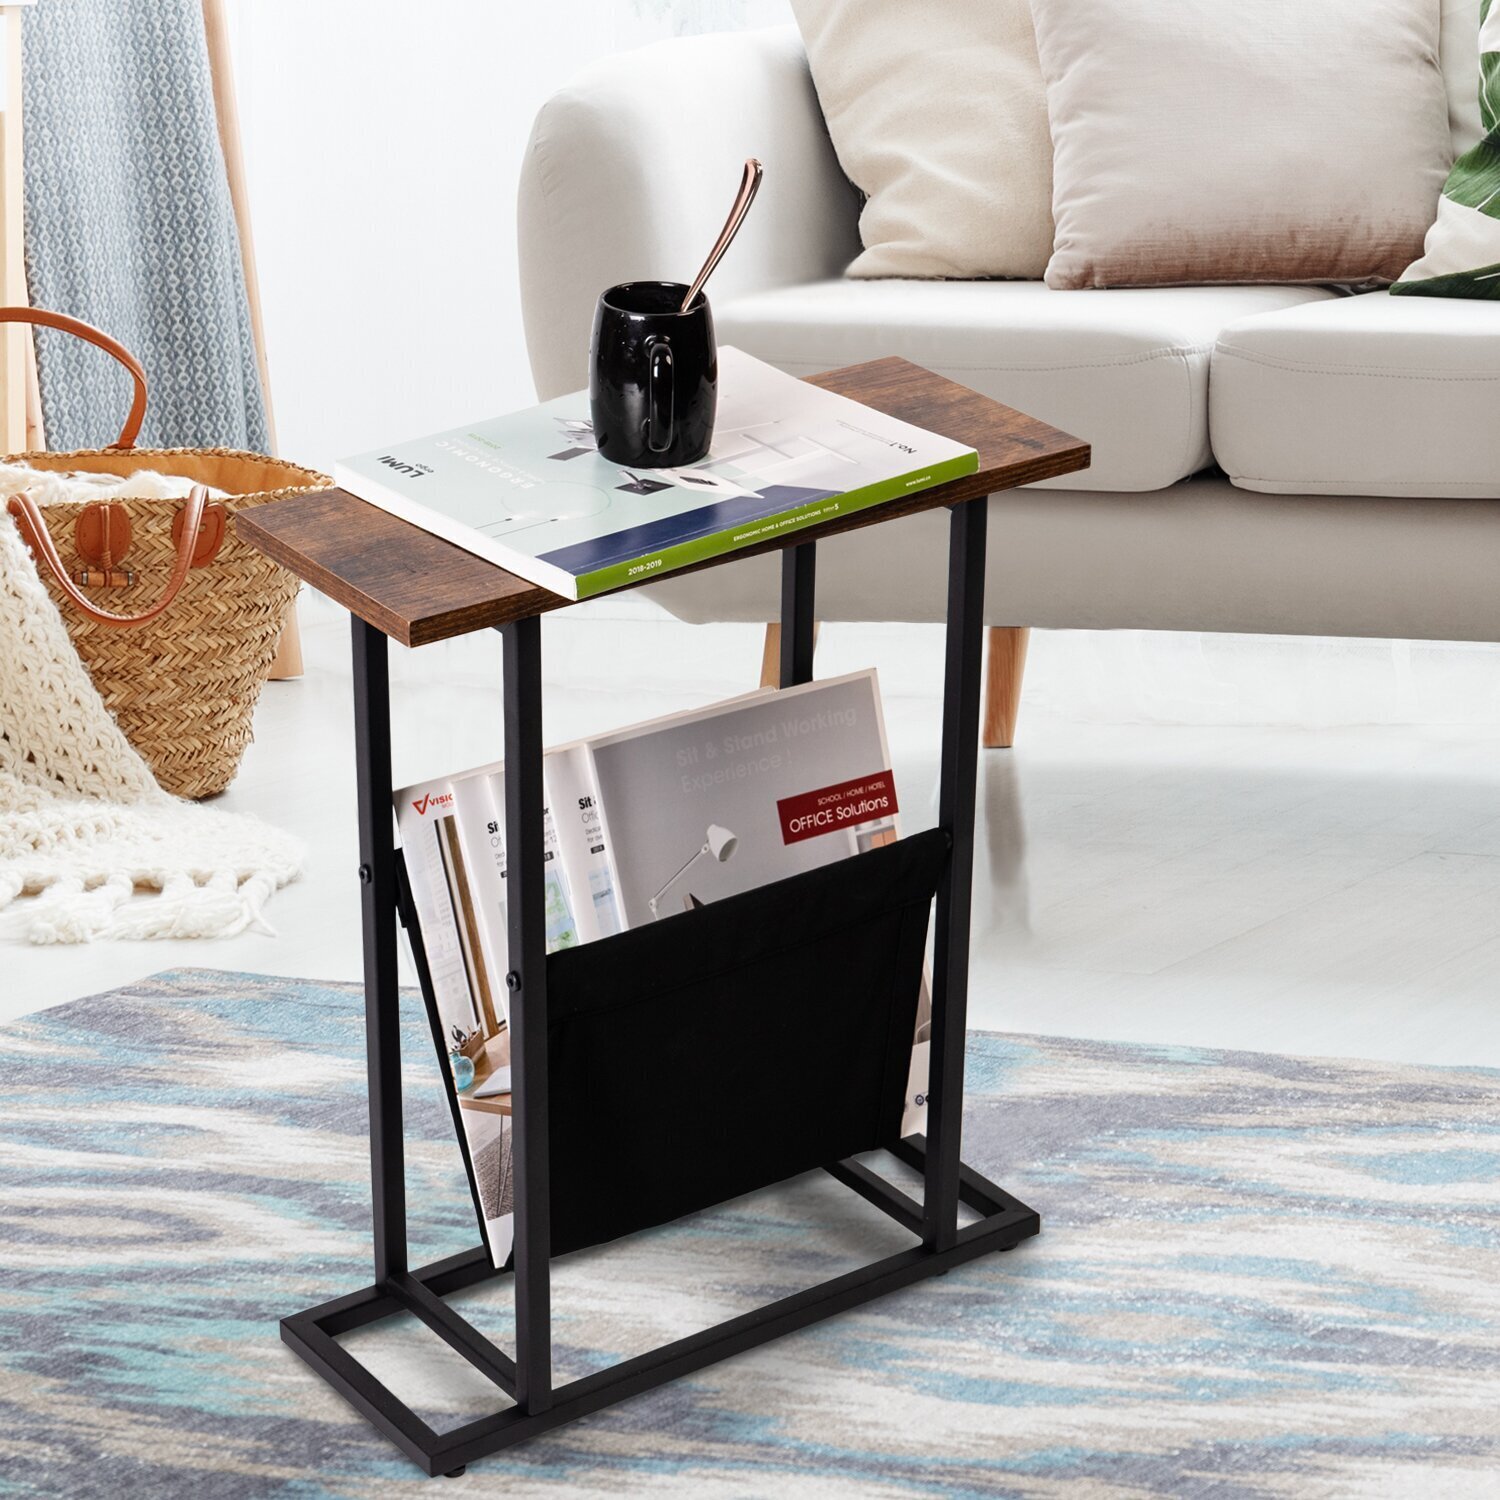 Industrial inspired side table with magazine rack